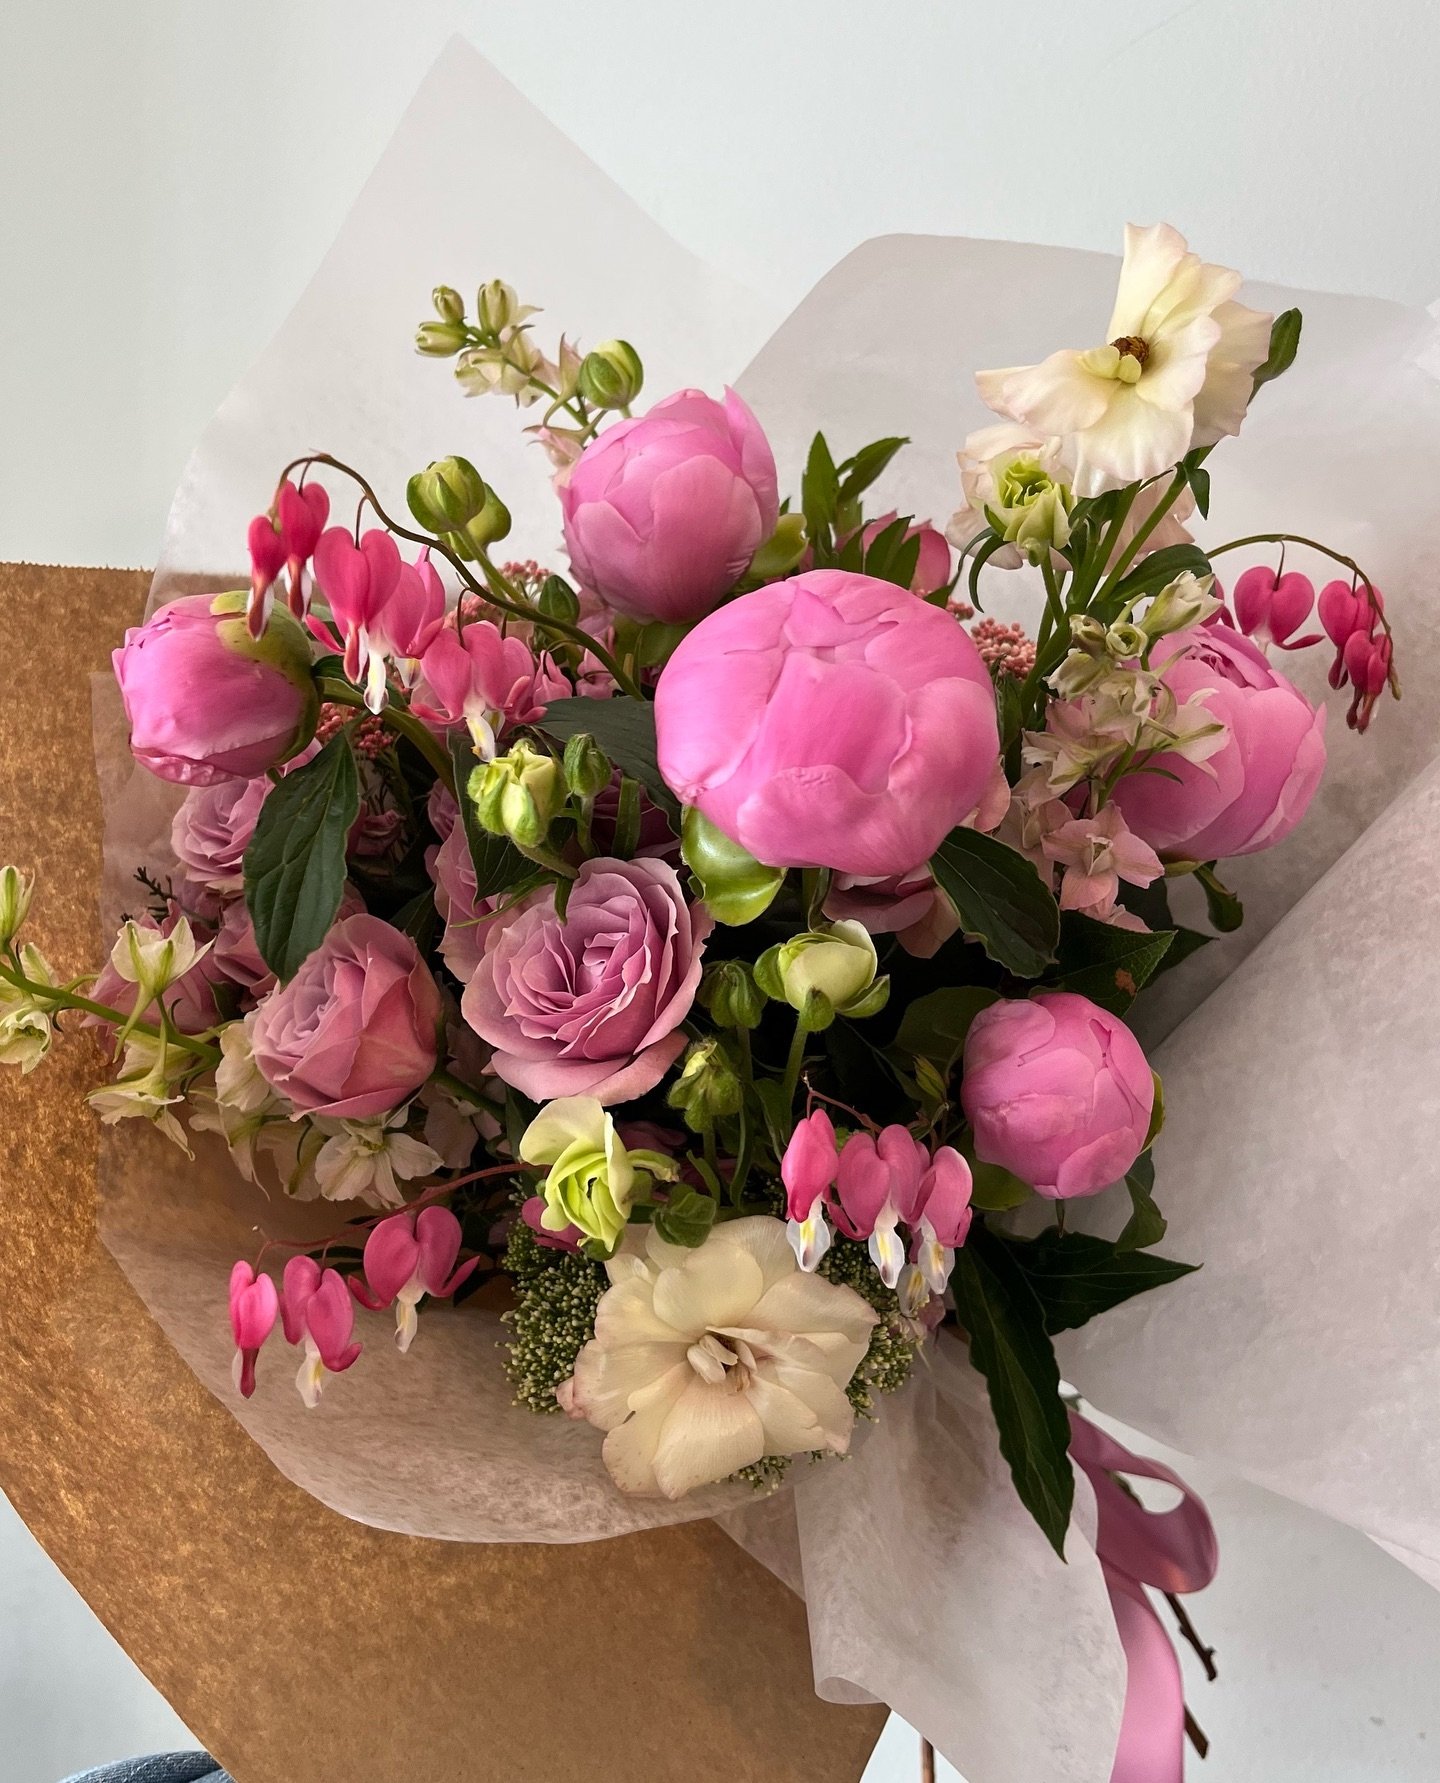 Snack wraps for mum! Don&rsquo;t forget to treat mum to some delicious spring blooms this Mother&rsquo;s Day. Premium wraps and arrangements available to order now on our website until May 7th. Order this week for delivery or pick up on Sunday May 12